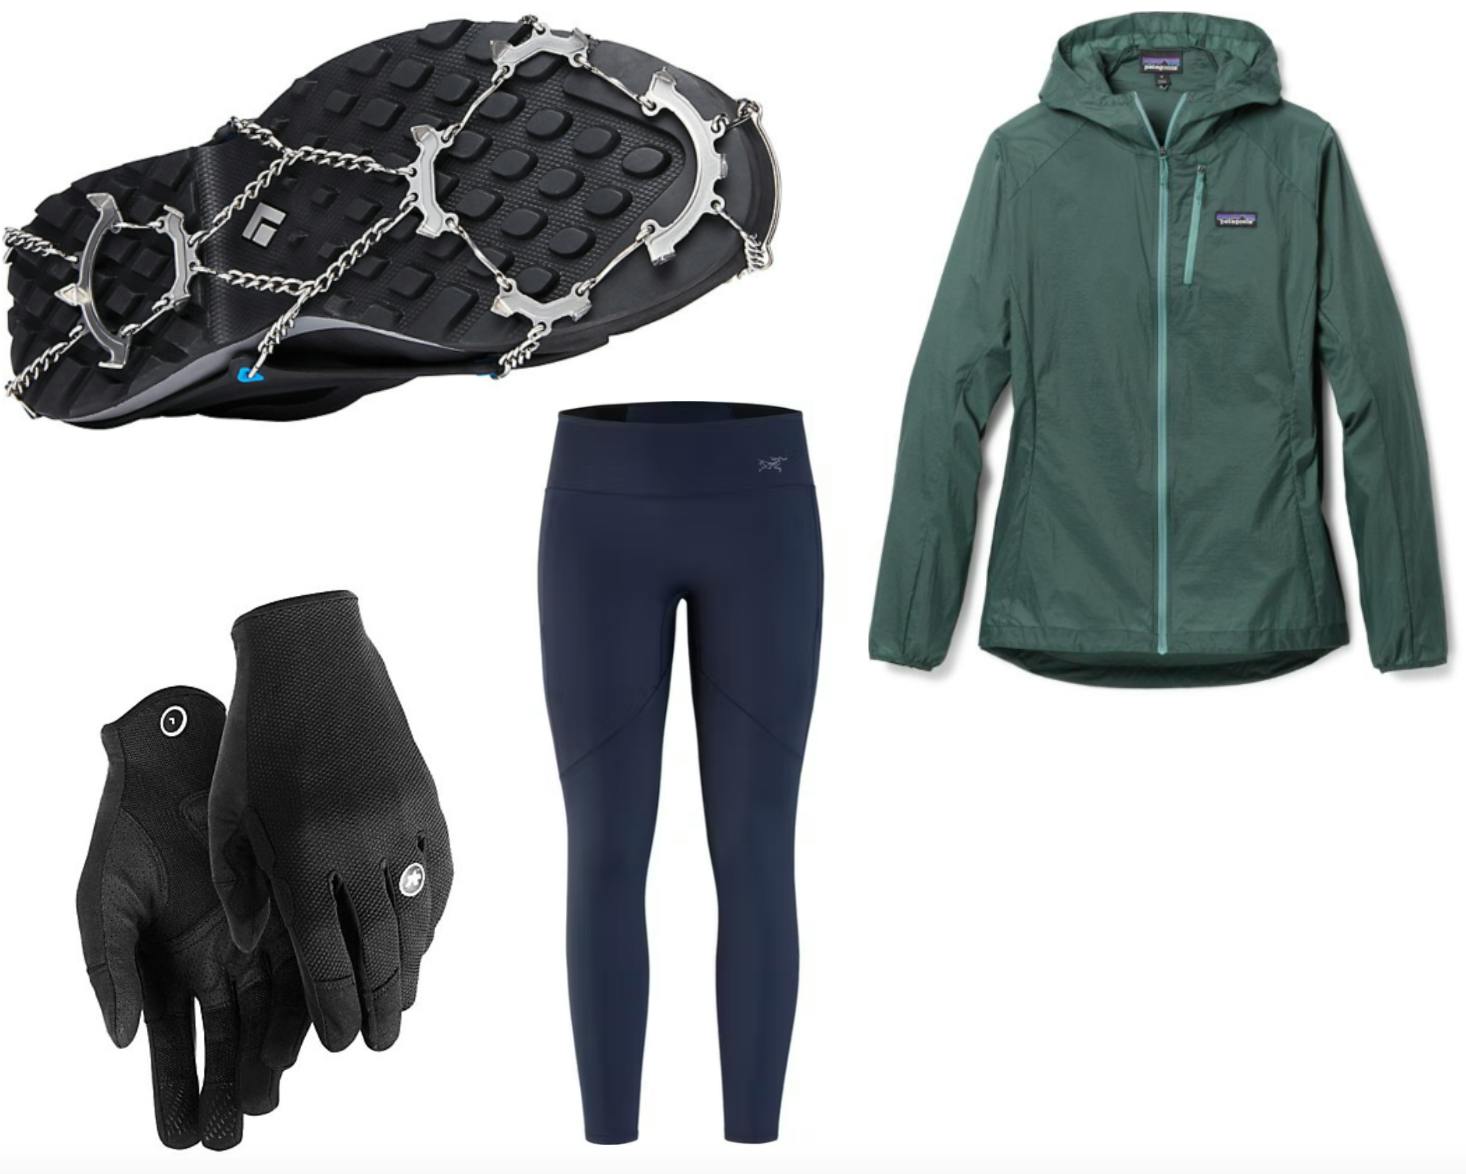 The Black Diamond Access Spikes (top left), the Assos Trail Glove (bottom left), the Arc'Teryx Oriel Legging (bottom middle), and the Patagonia Houdini Windbreaker (top right).